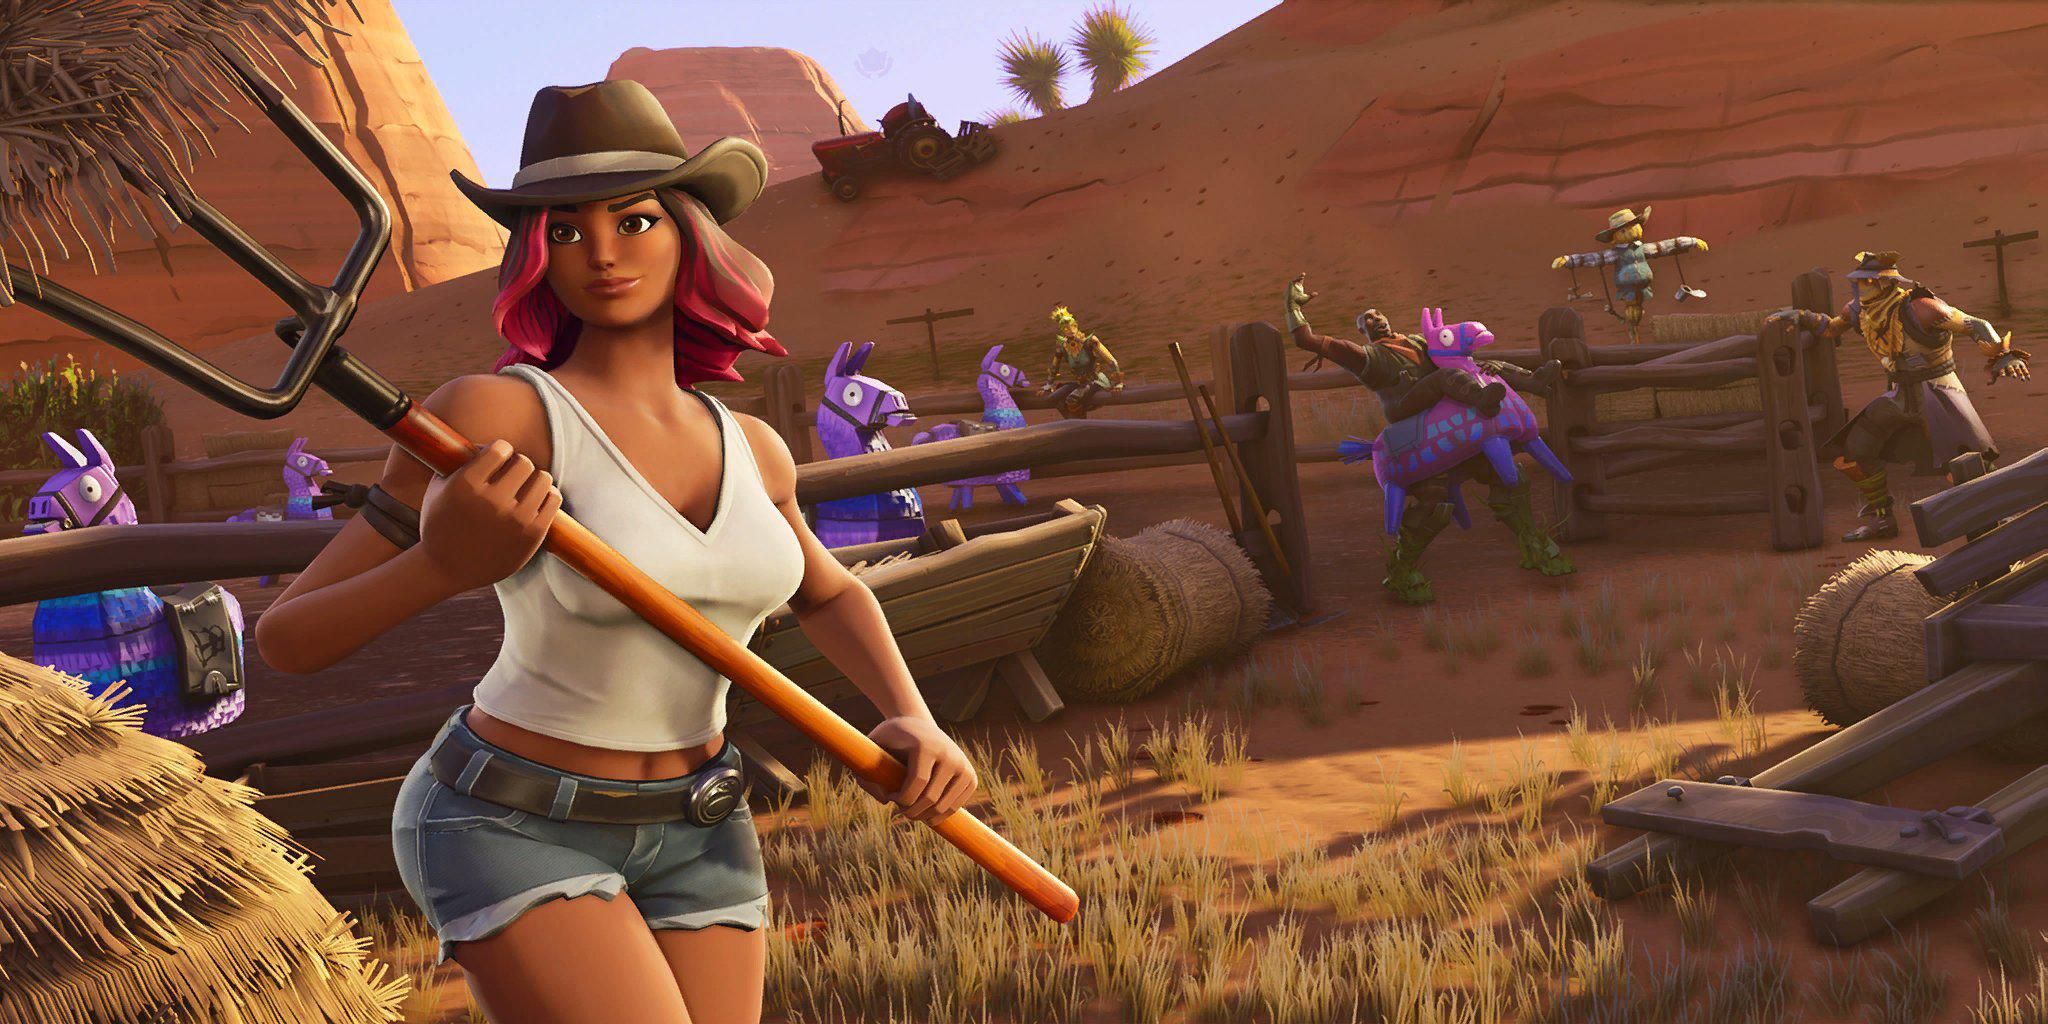 Calamity in the dessert surrounded by other Fortnite characters on a farm